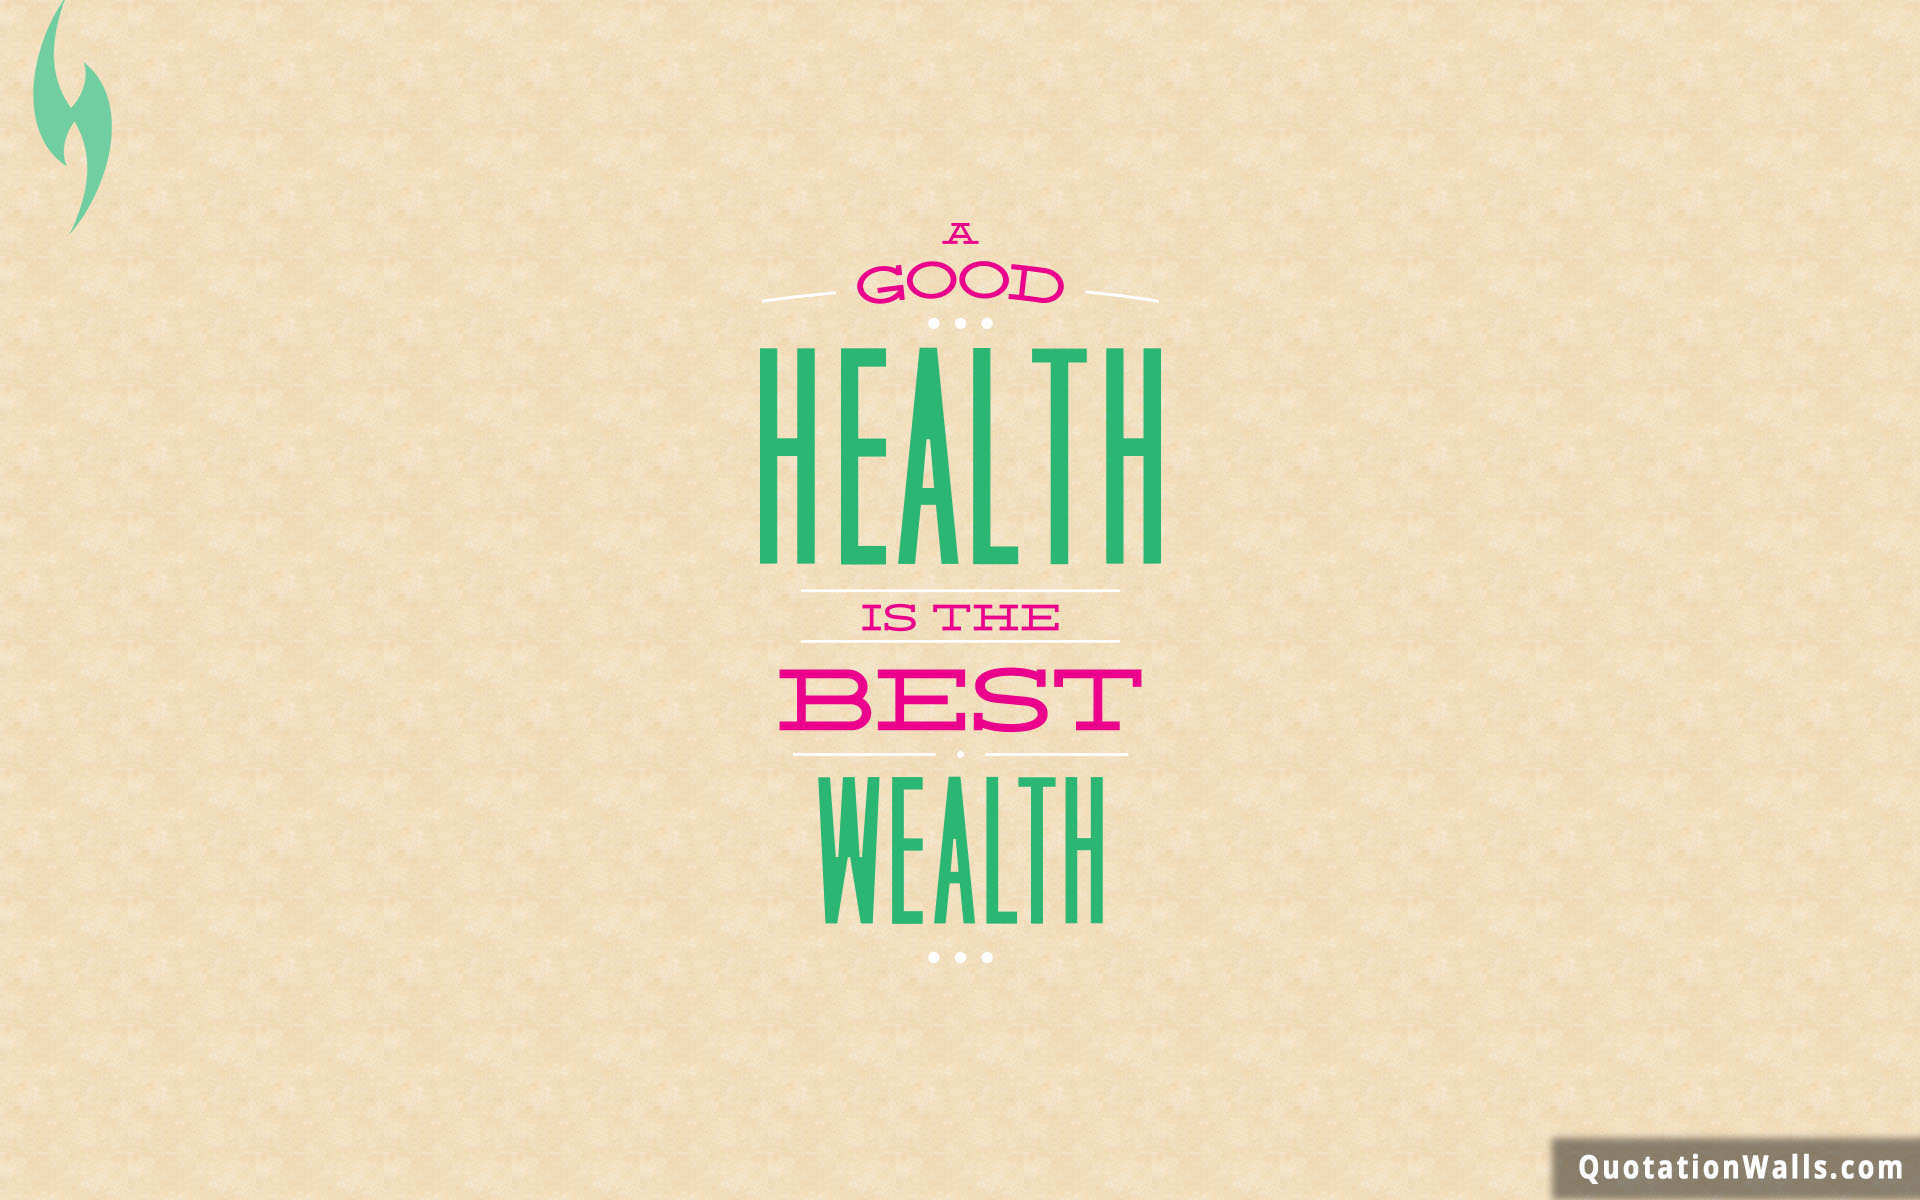 Health Is Wealth Life Wallpaper for Mobile